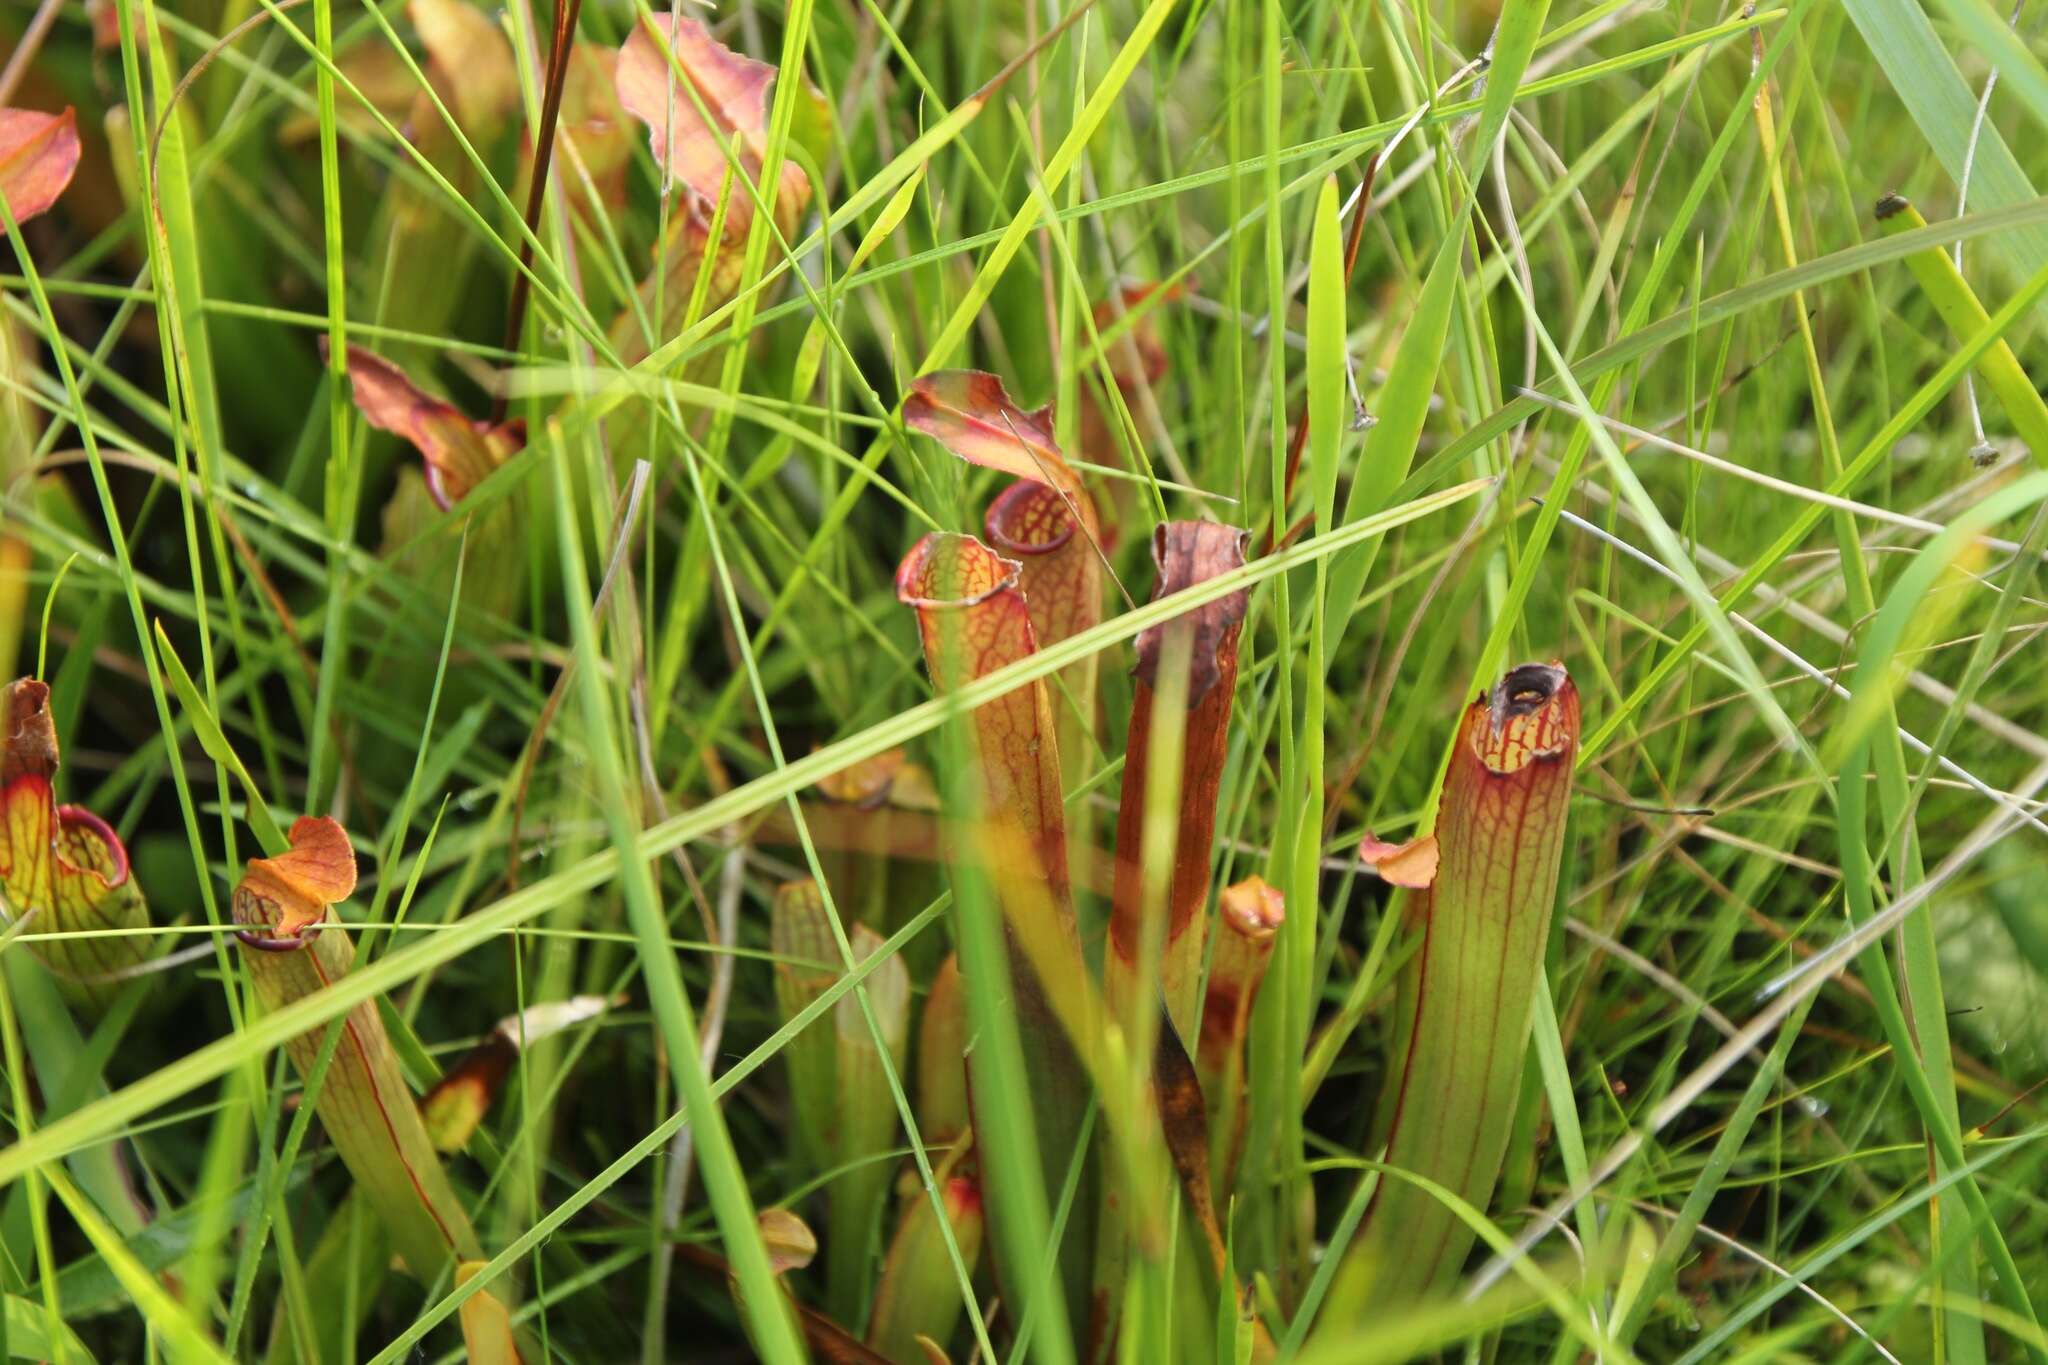 Image of Sweet pitcher plant